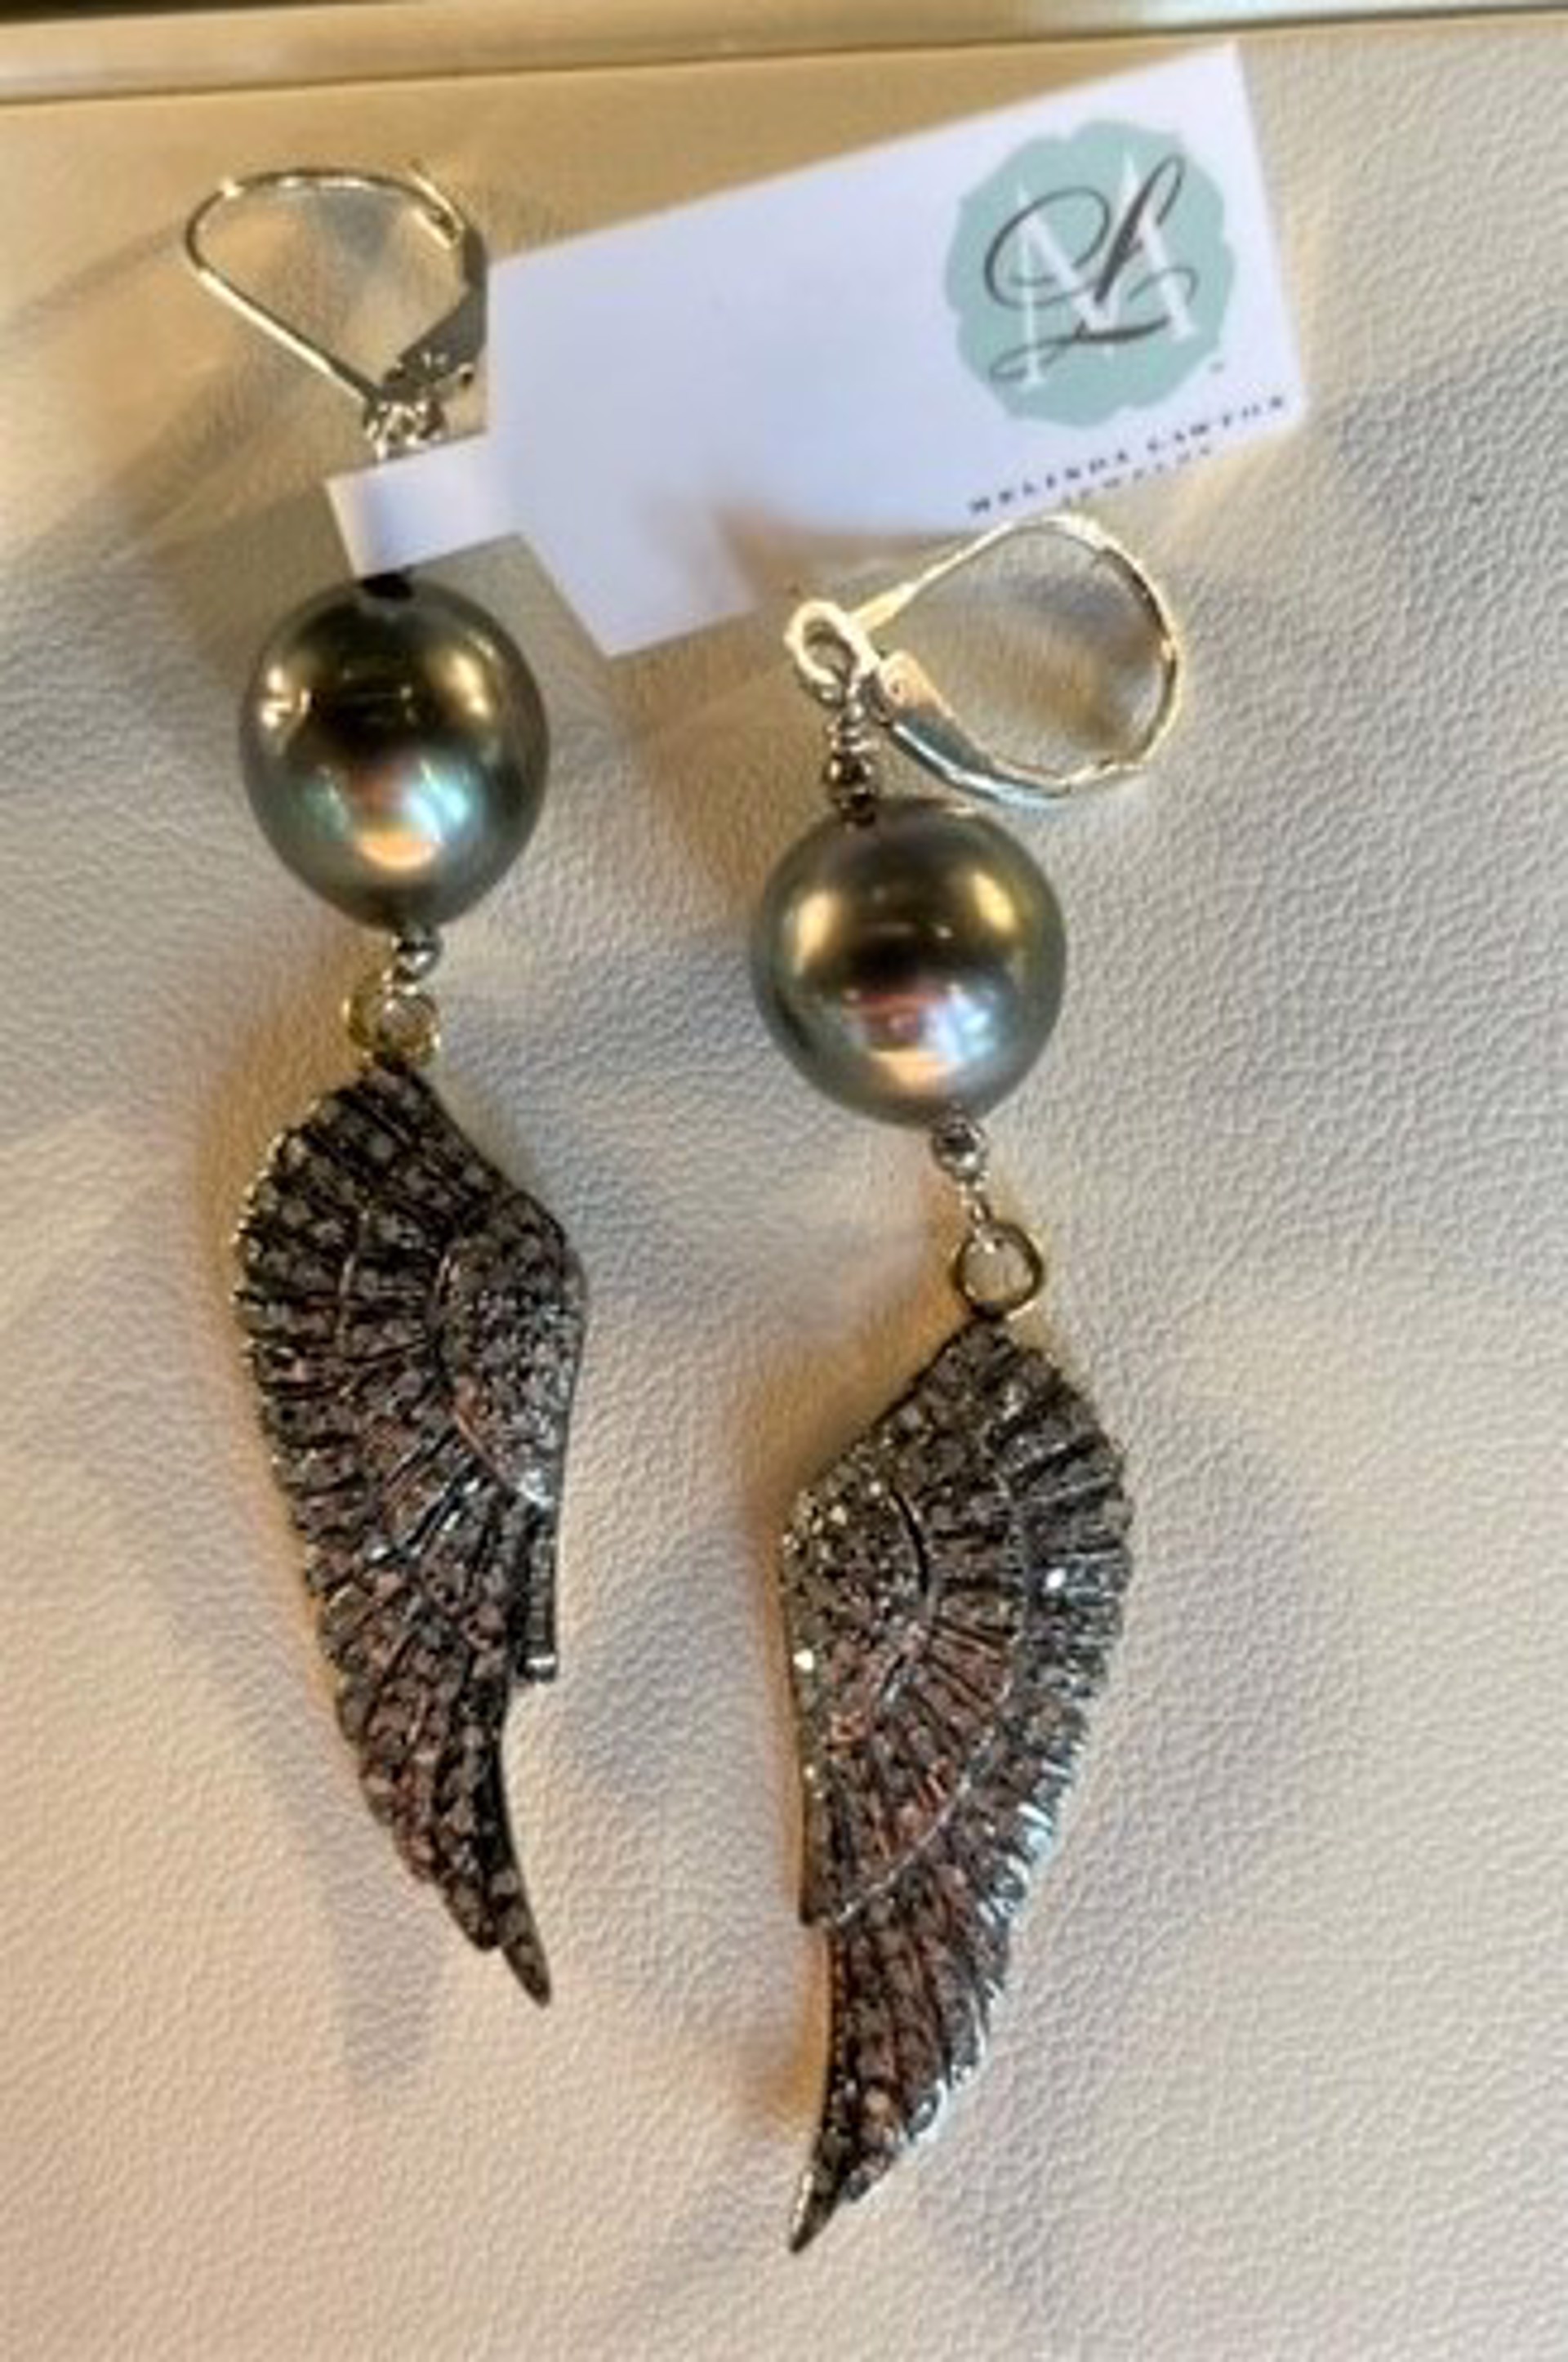 Pave diamonds in oxidized sterling angel wings hanging from Tahitian pearls in sterling silver by Melinda Lawton Jewelry